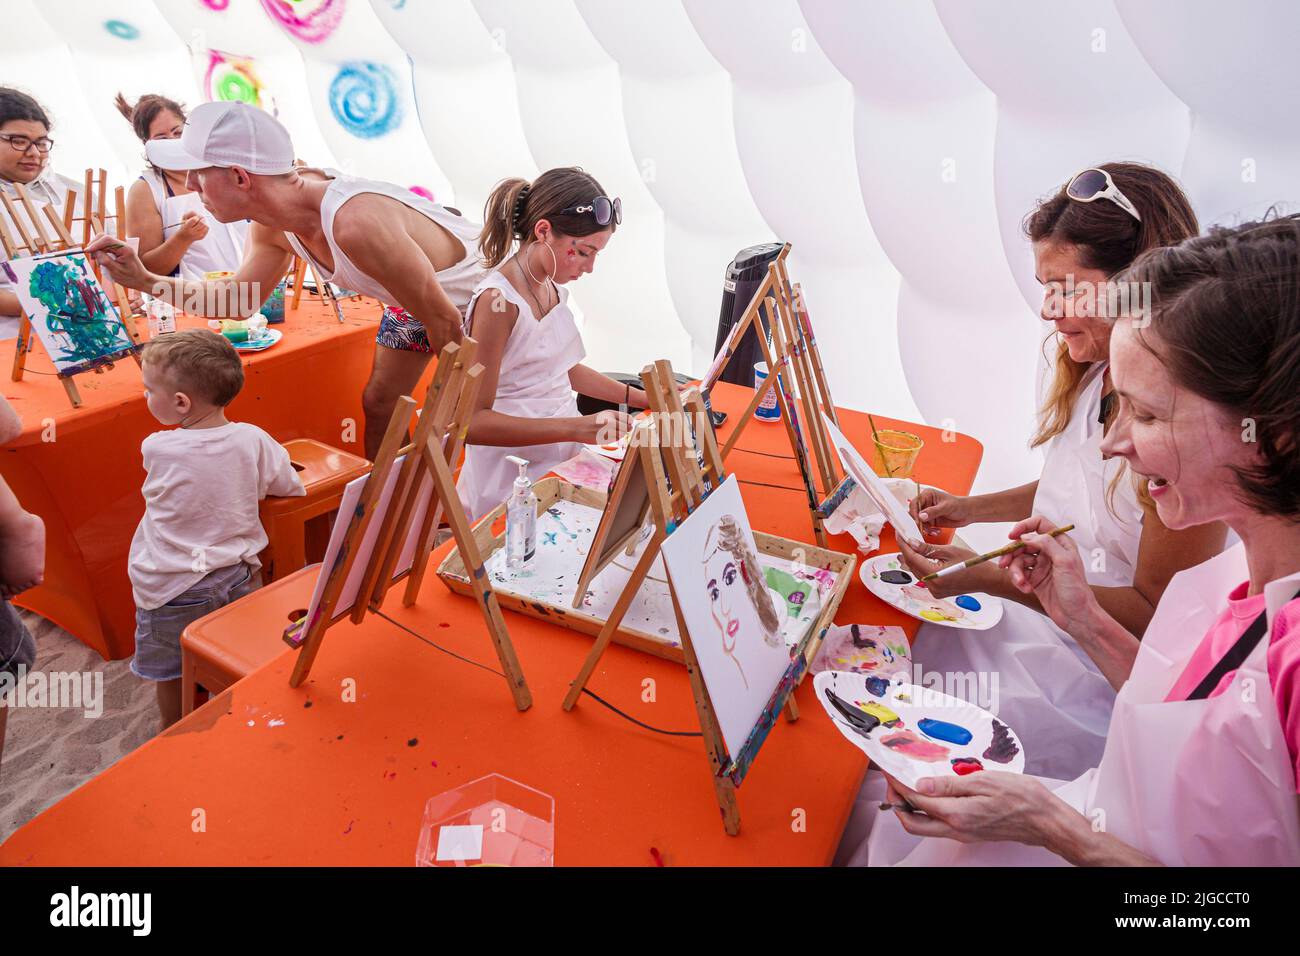 Miami Beach Florida,Ocean Terrace Fire on the Fourth 4th of July Festival event celebration,arts & crafts tent painting family families activity,woman Stock Photo